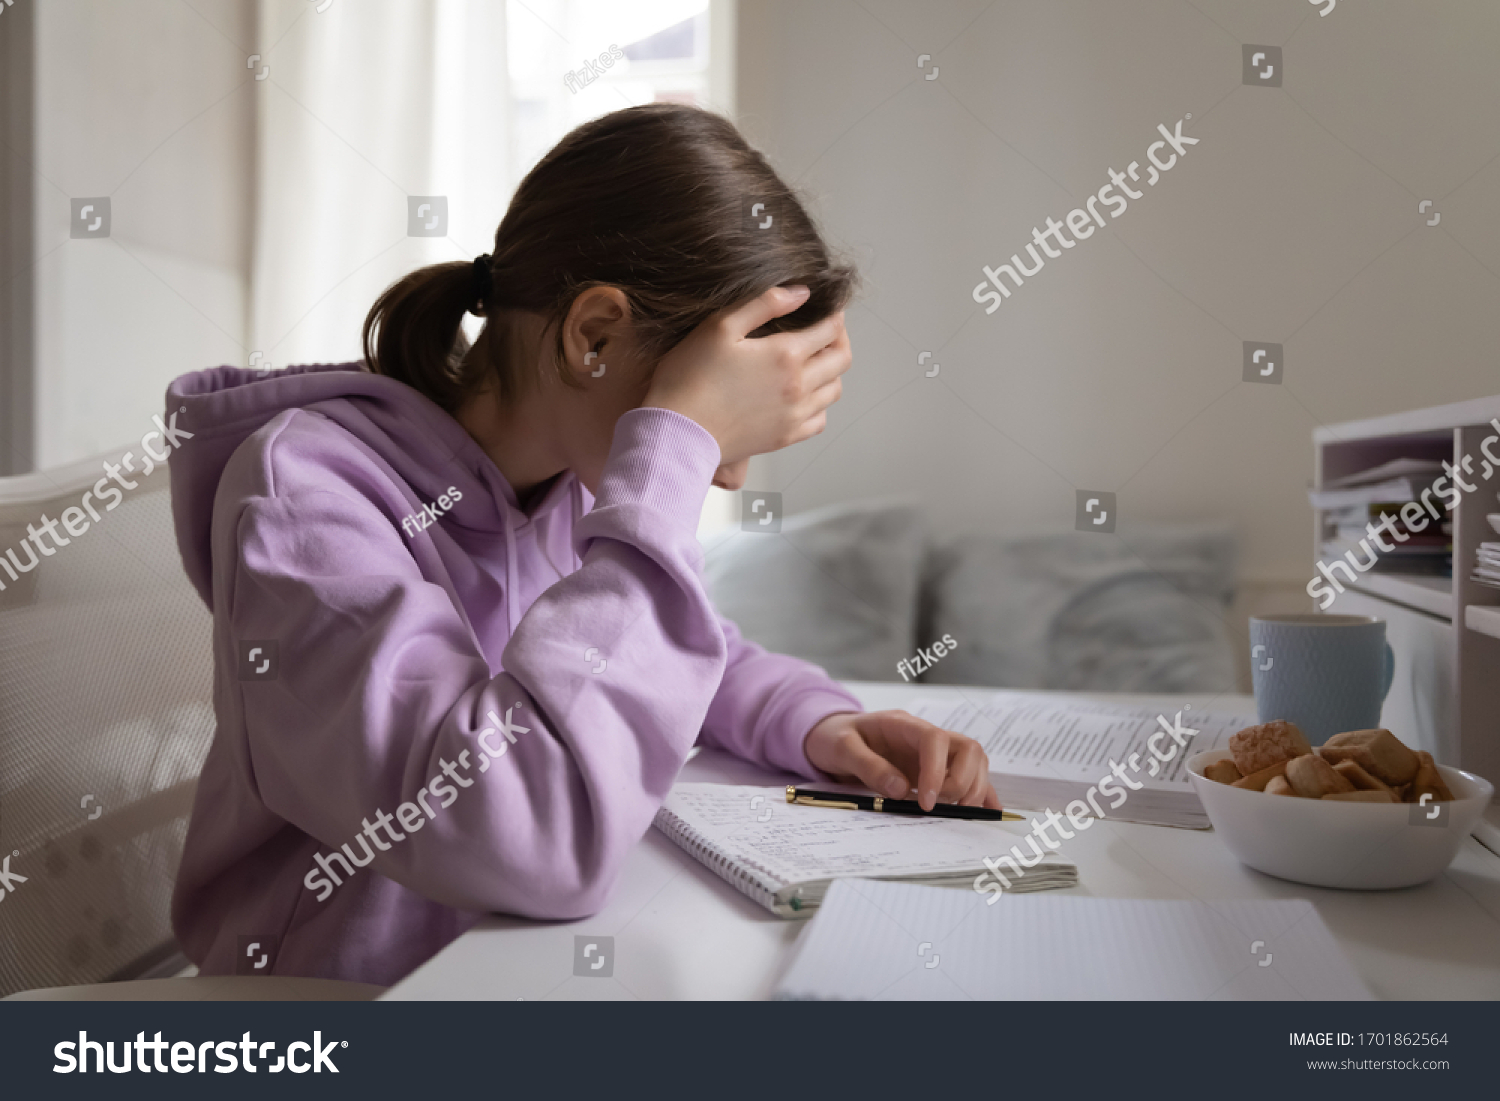 Tired bored teenage kid girl school student feeling headache or fatigue doing homework at home. Exhausted depressed sick teenager studying alone worried about difficult education problems concept. #1701862564